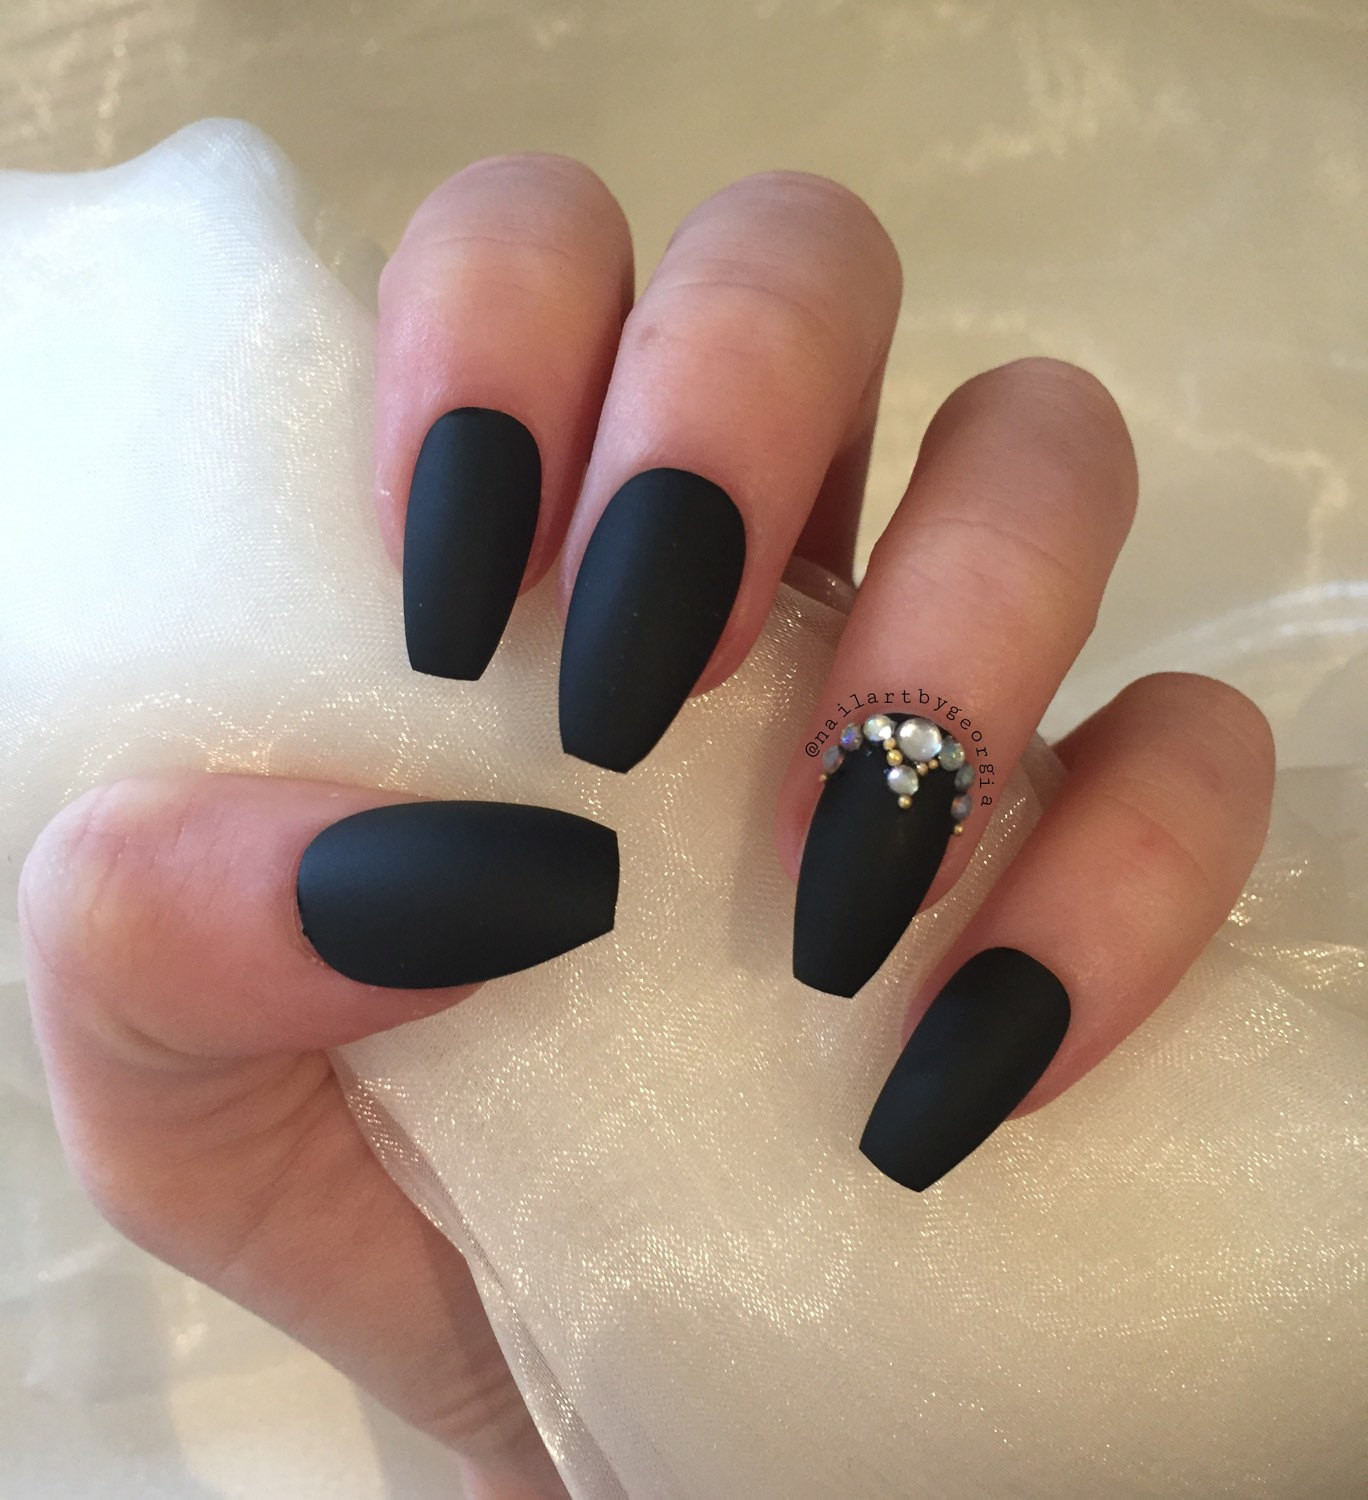 Coffin Nail Designs Matte
 Matte black coffin nails with rhinestones and gold beads